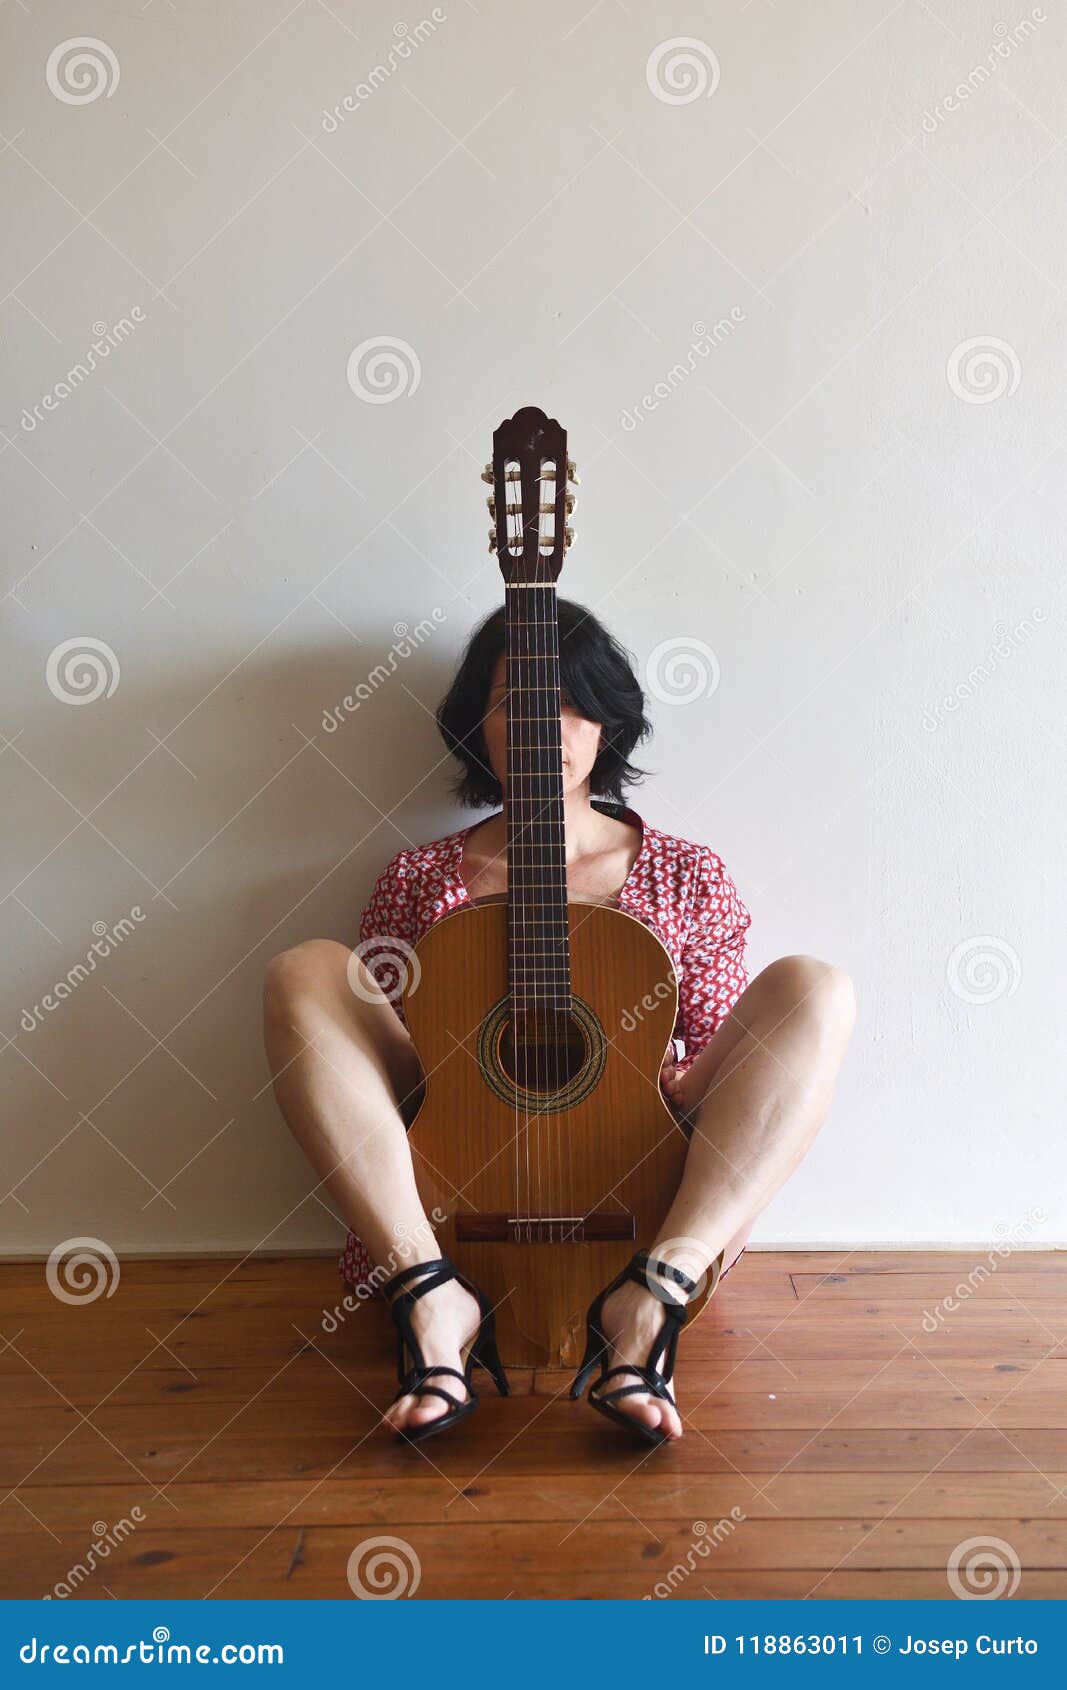 a woman sitting with a guitar